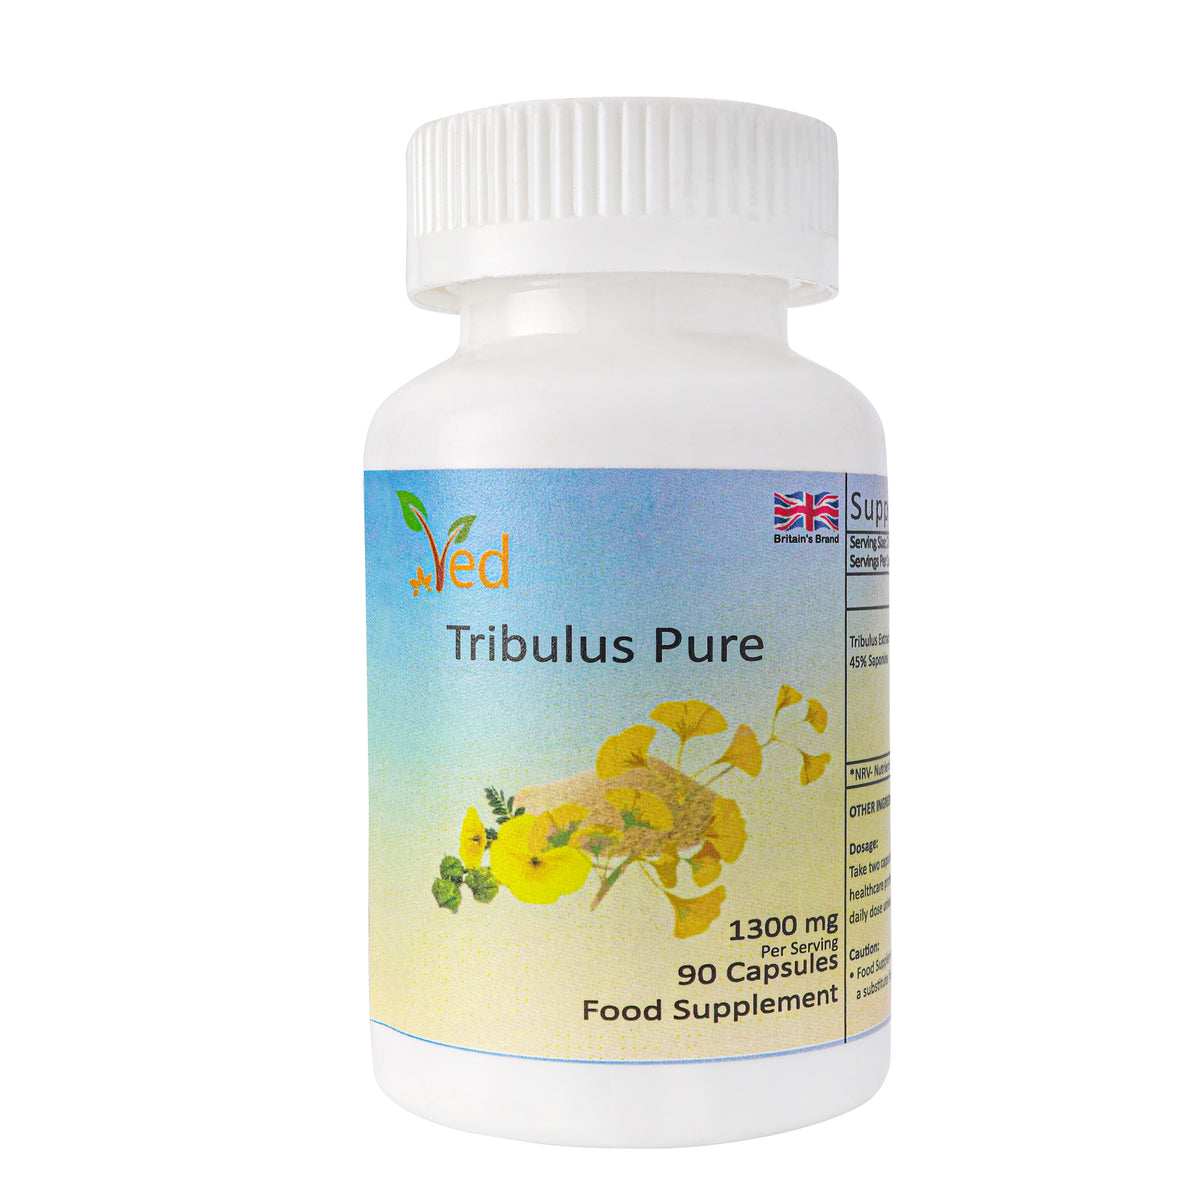 Ved Organic Tribulus, High Potency & Pure with 45% Saponins,1300 mg per Serving,90 Capsule (45 Days Supply).